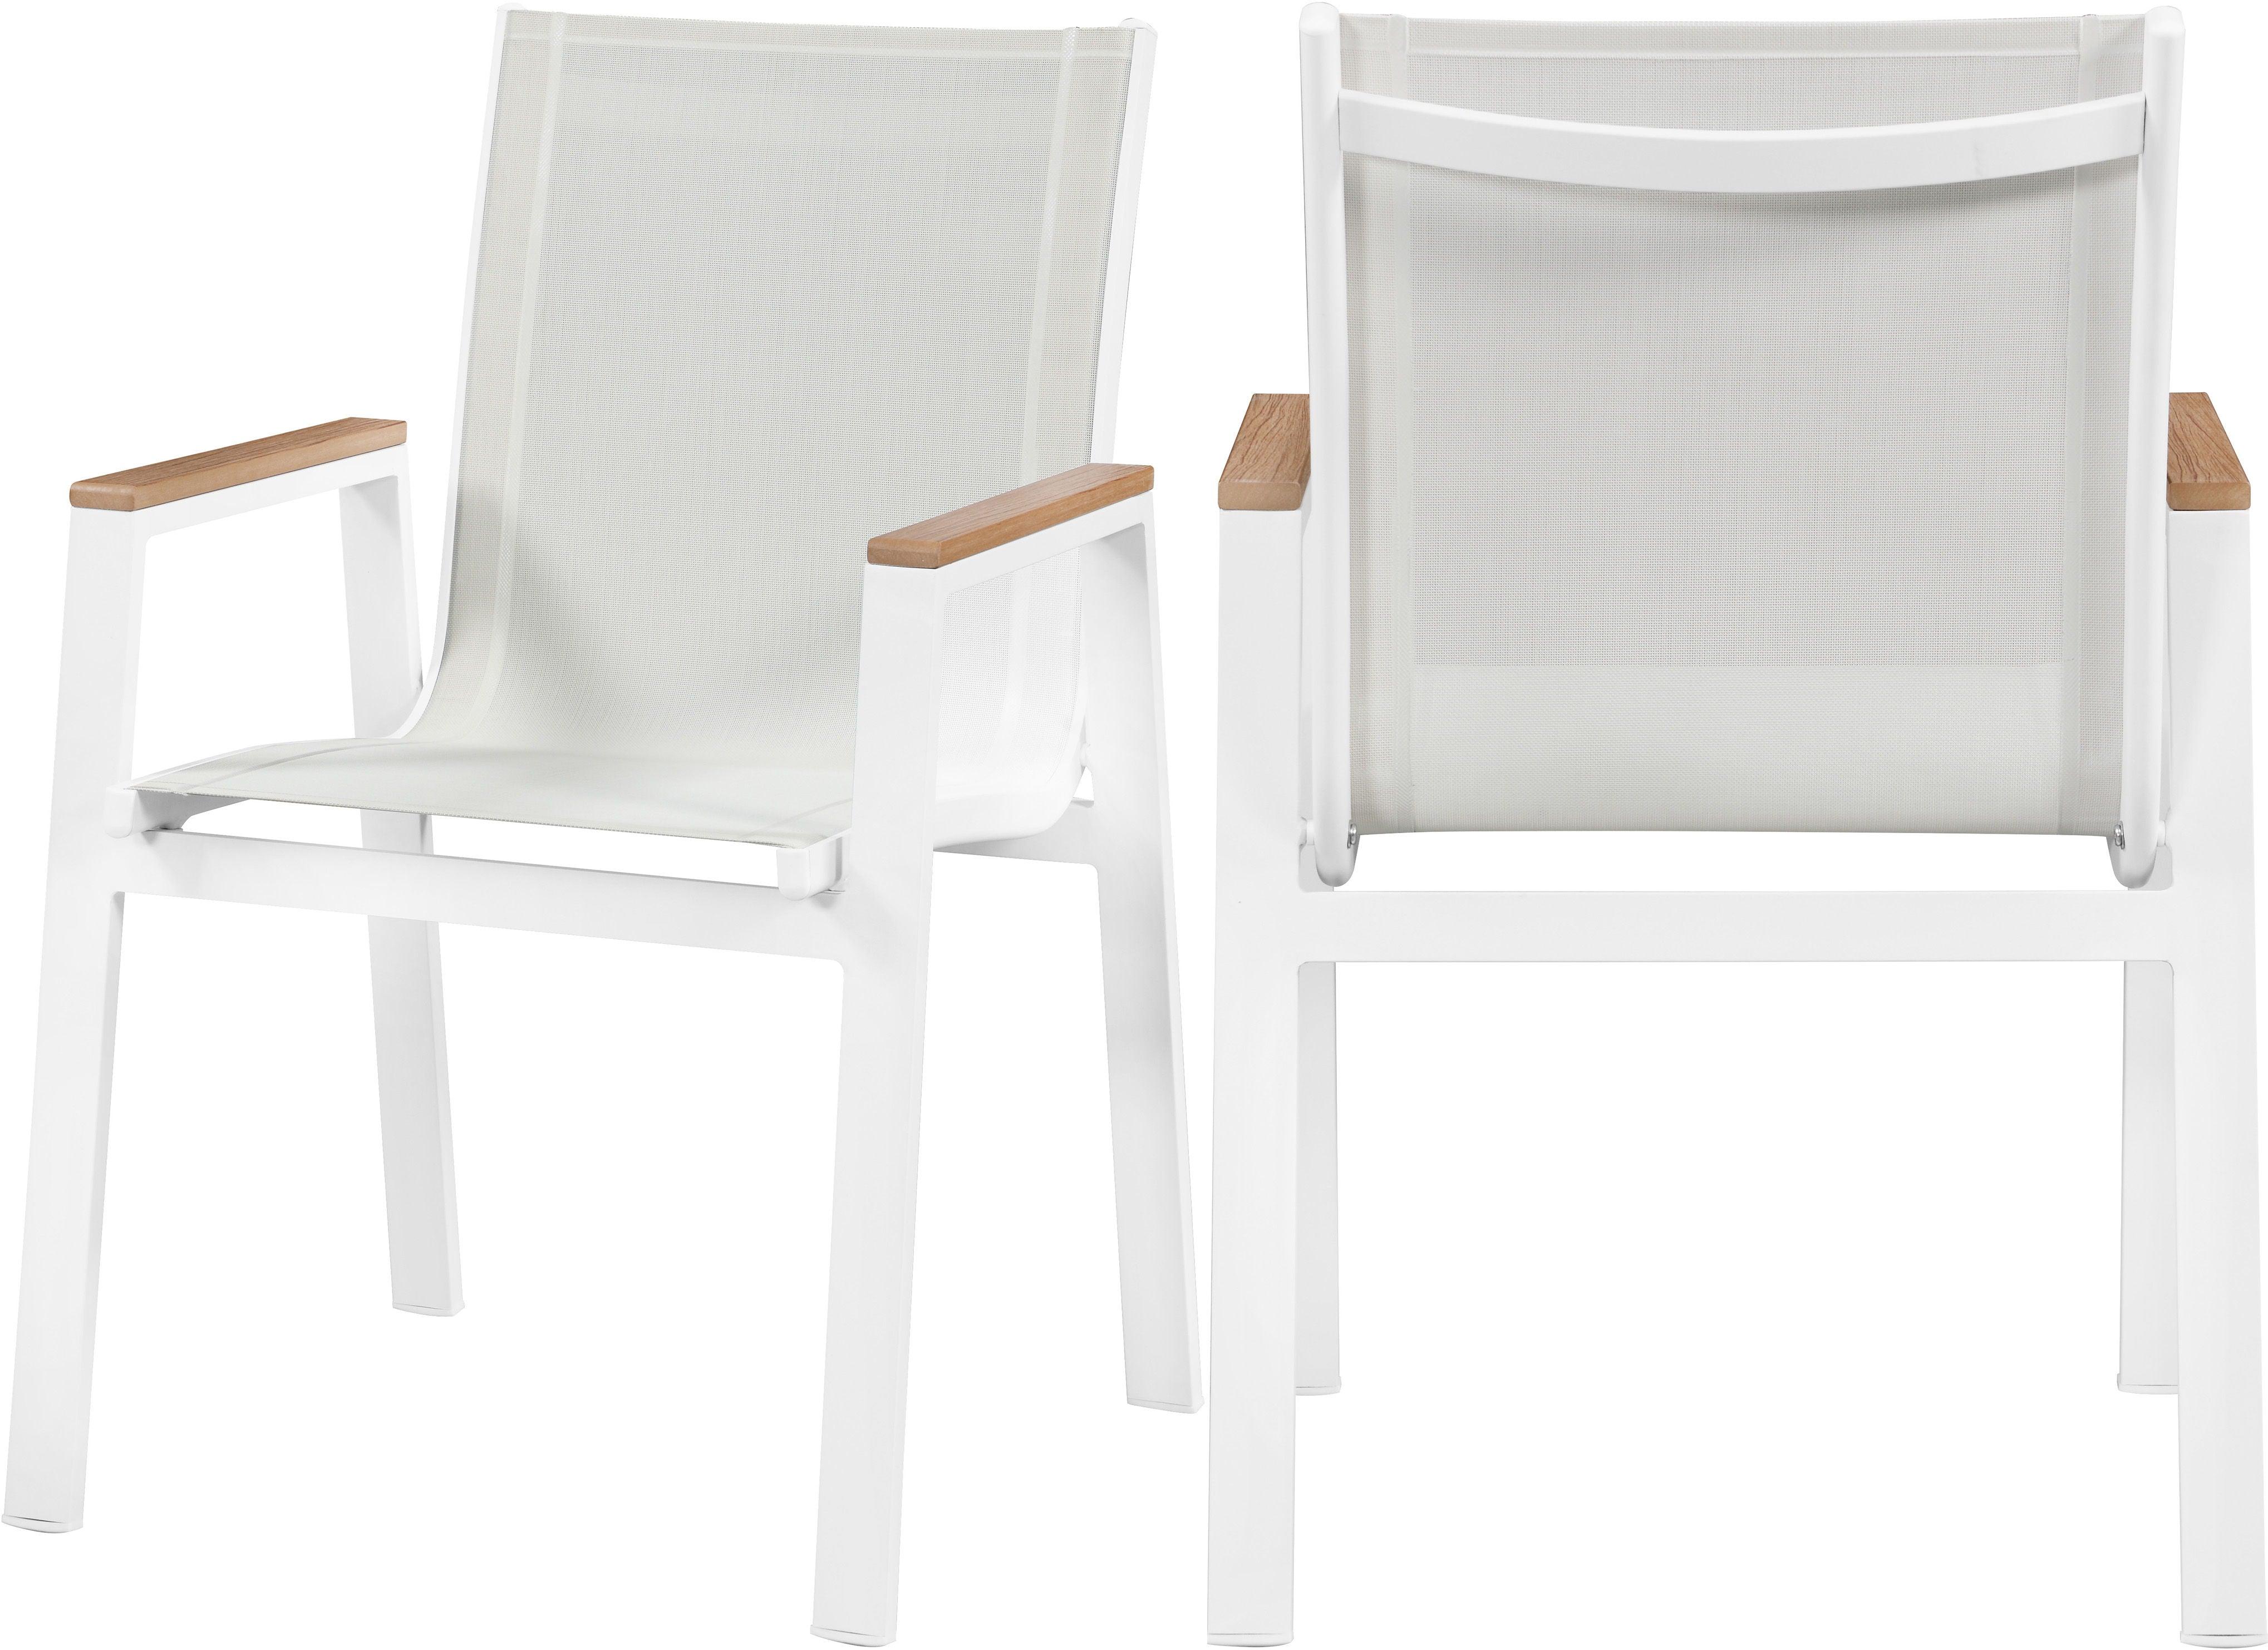 Meridian Furniture - Nizuc - Outdoor Patio Dining Arm Chair (Set of 2) - White - Fabric - 5th Avenue Furniture